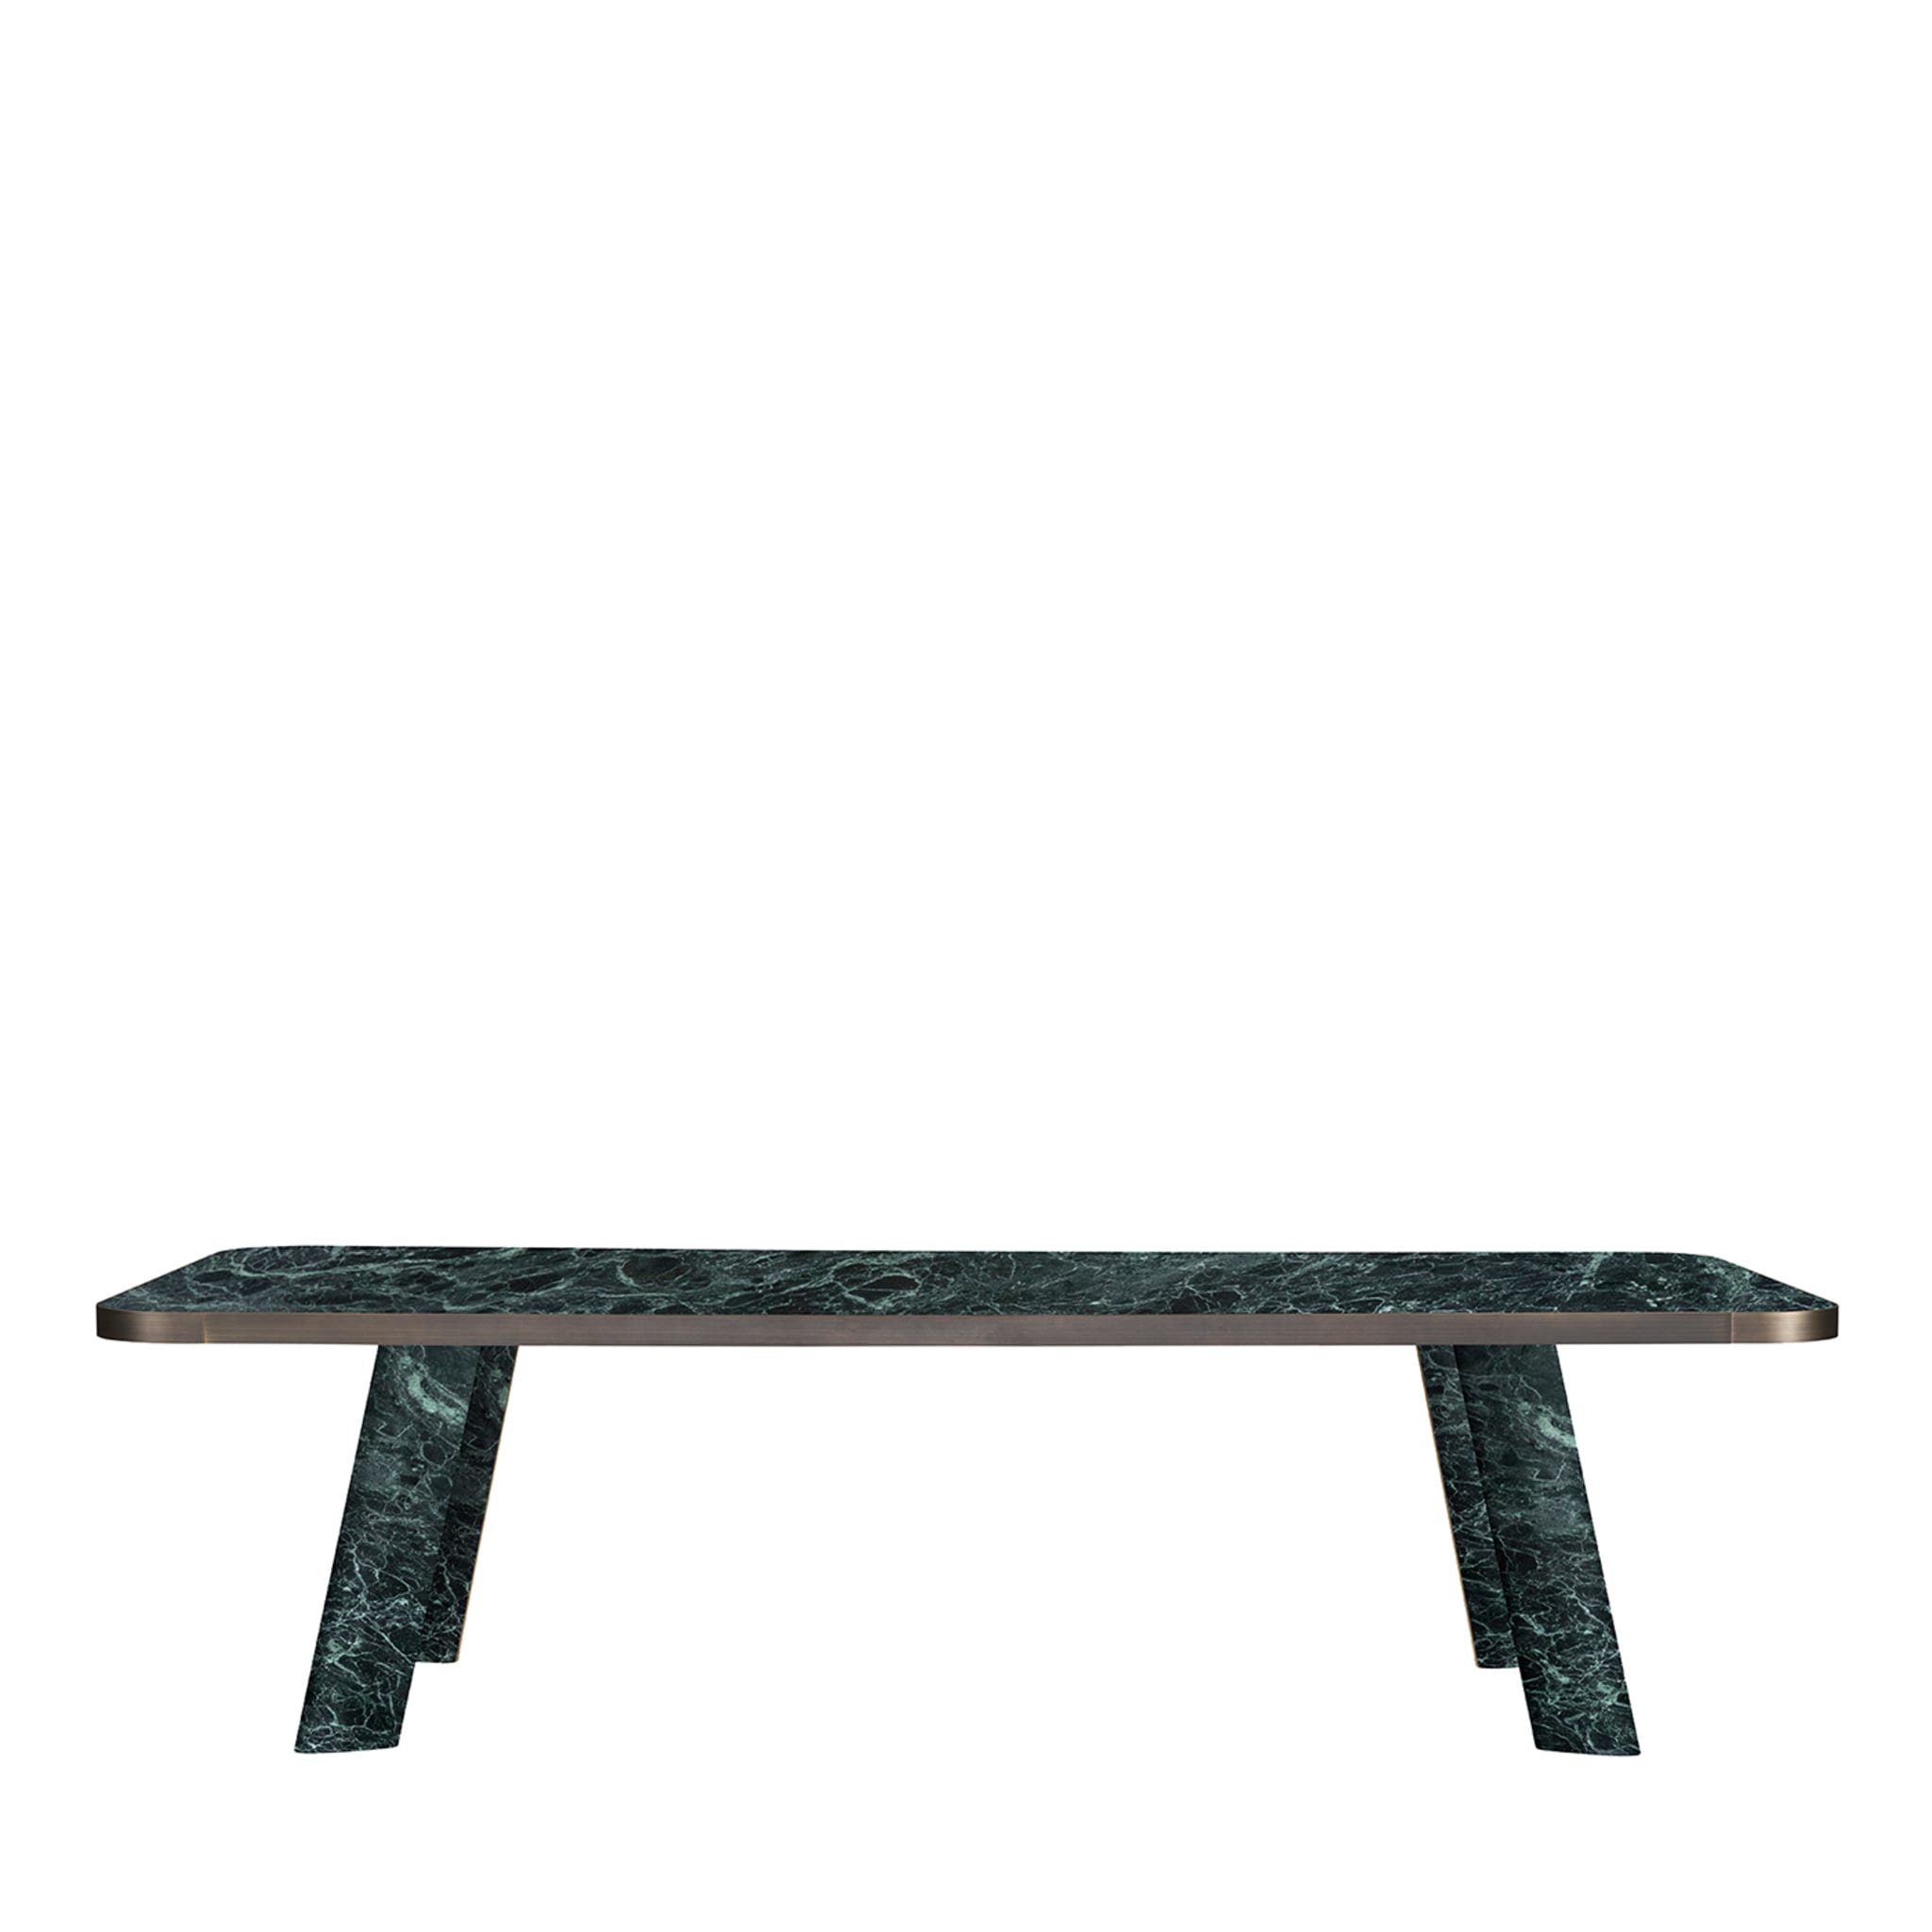 Native Verde Alpi Rectangular Dining Table by Stefano Giovannoni - Main view